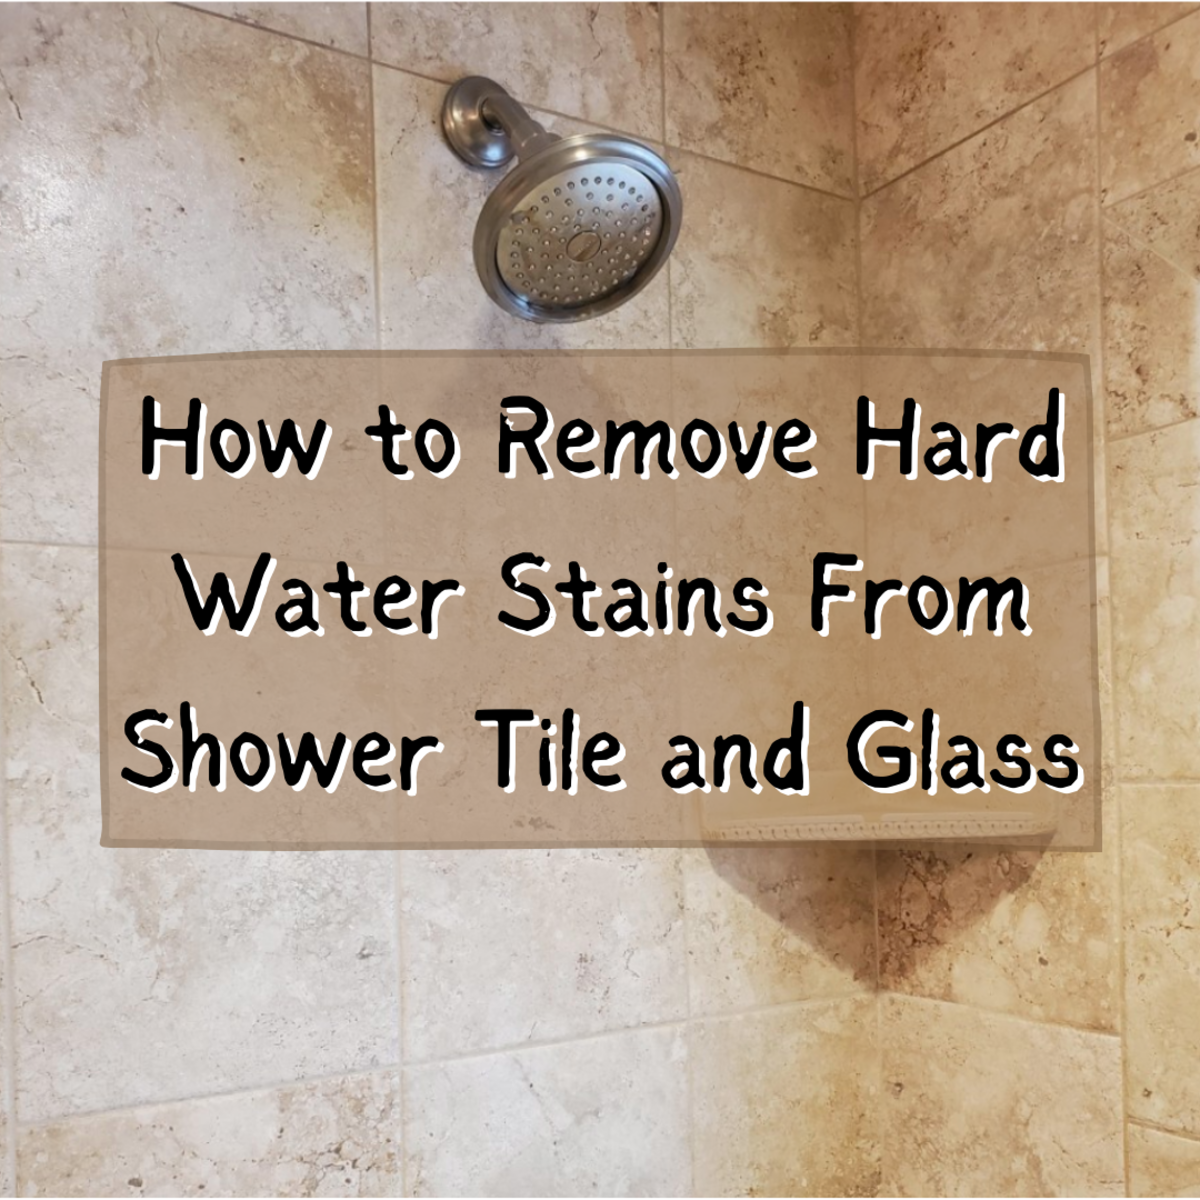 Removing hard water stains from ceramic tile can be a real pain. Read on to find out about the products that will make this job much easier for you.